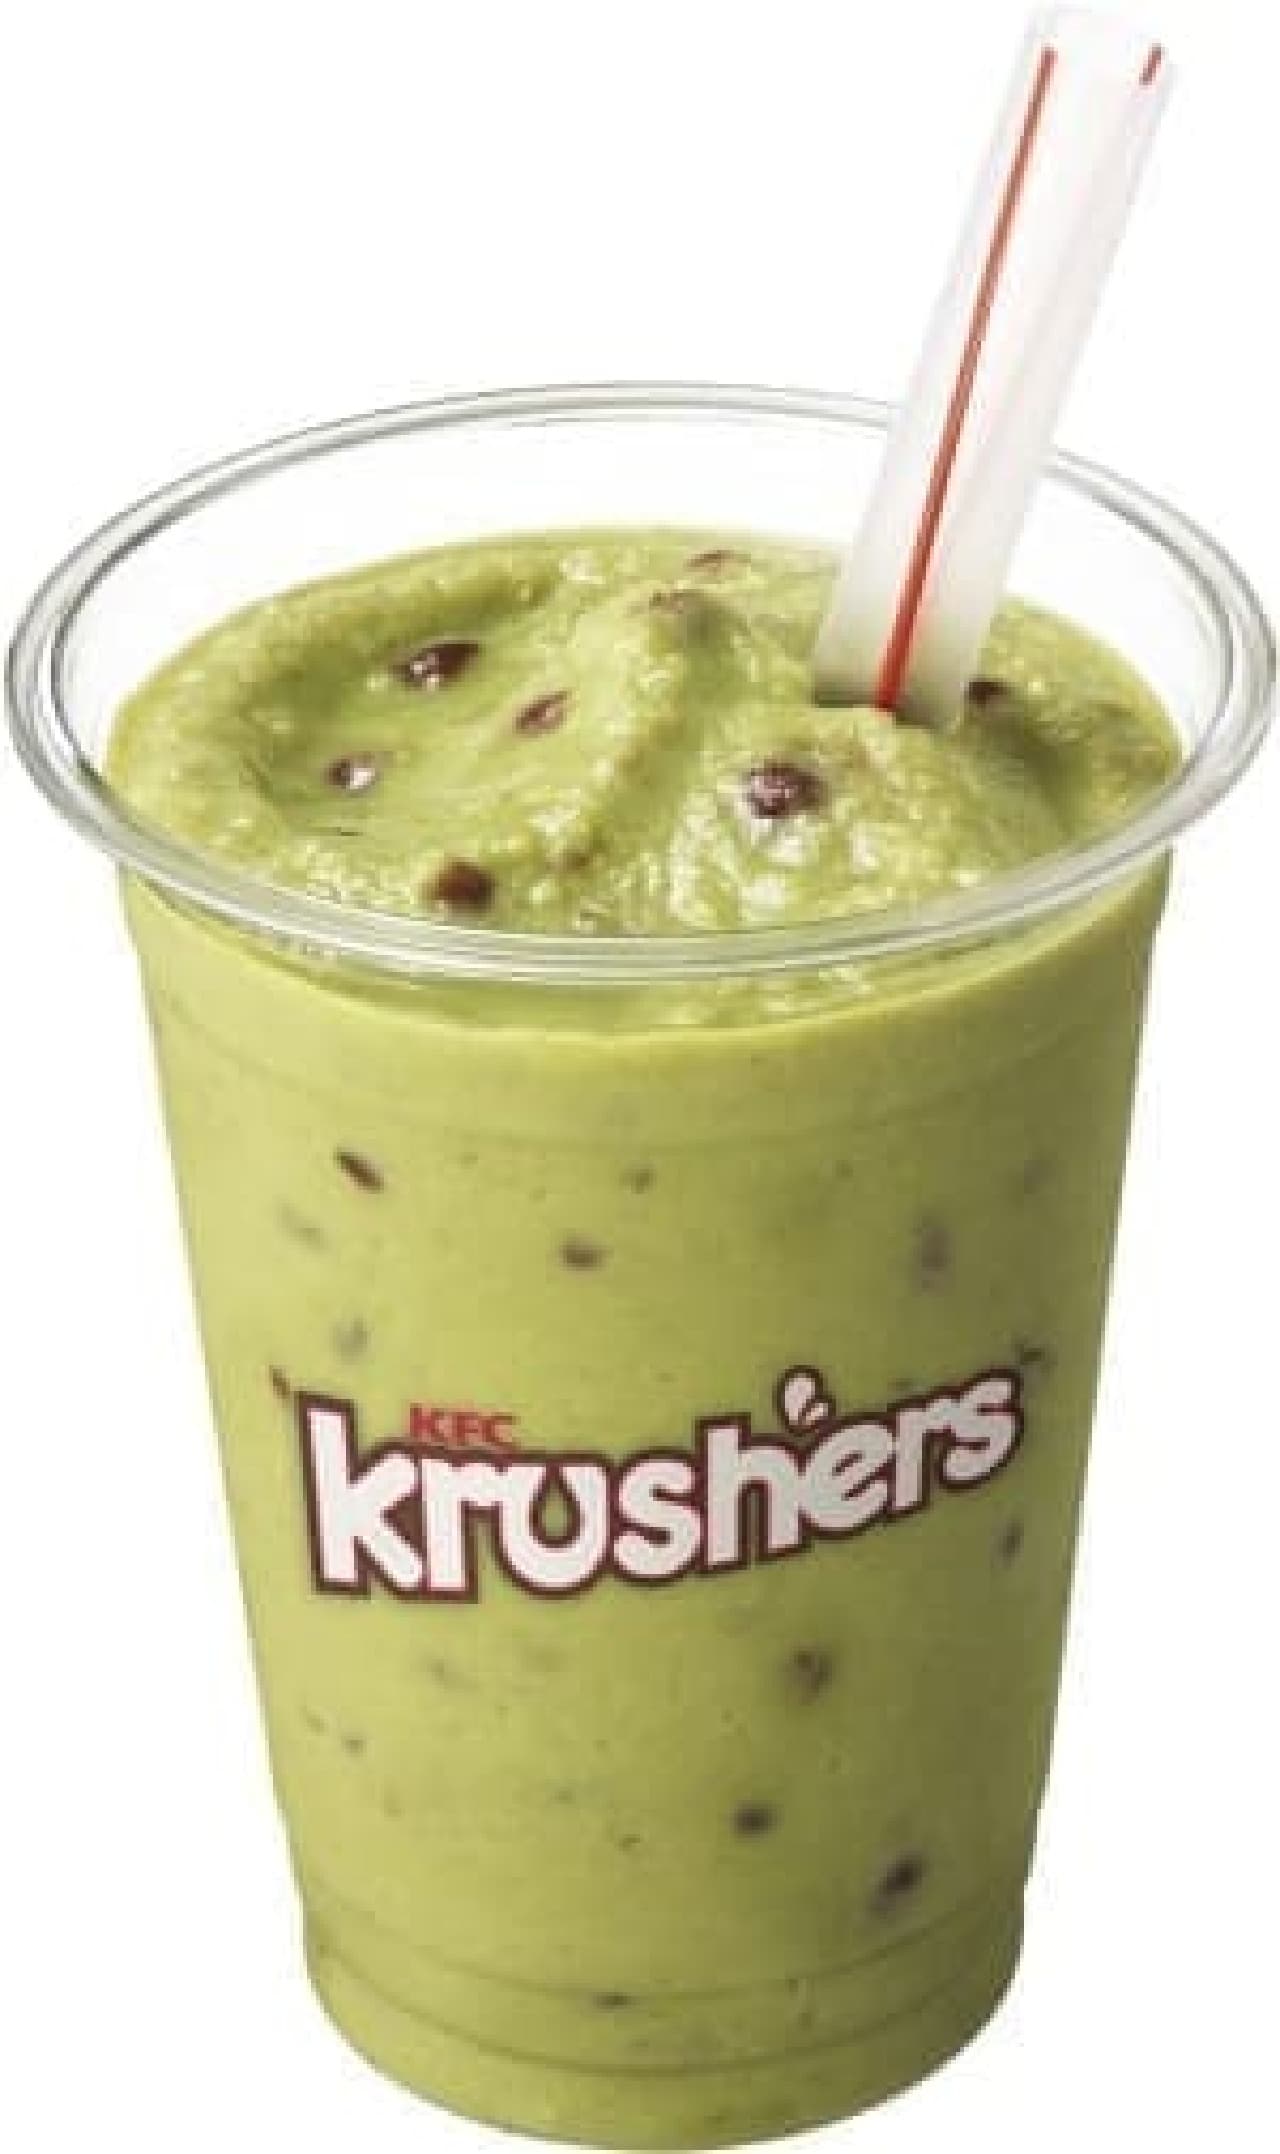 Matcha flavor is now available for drinking sweets!